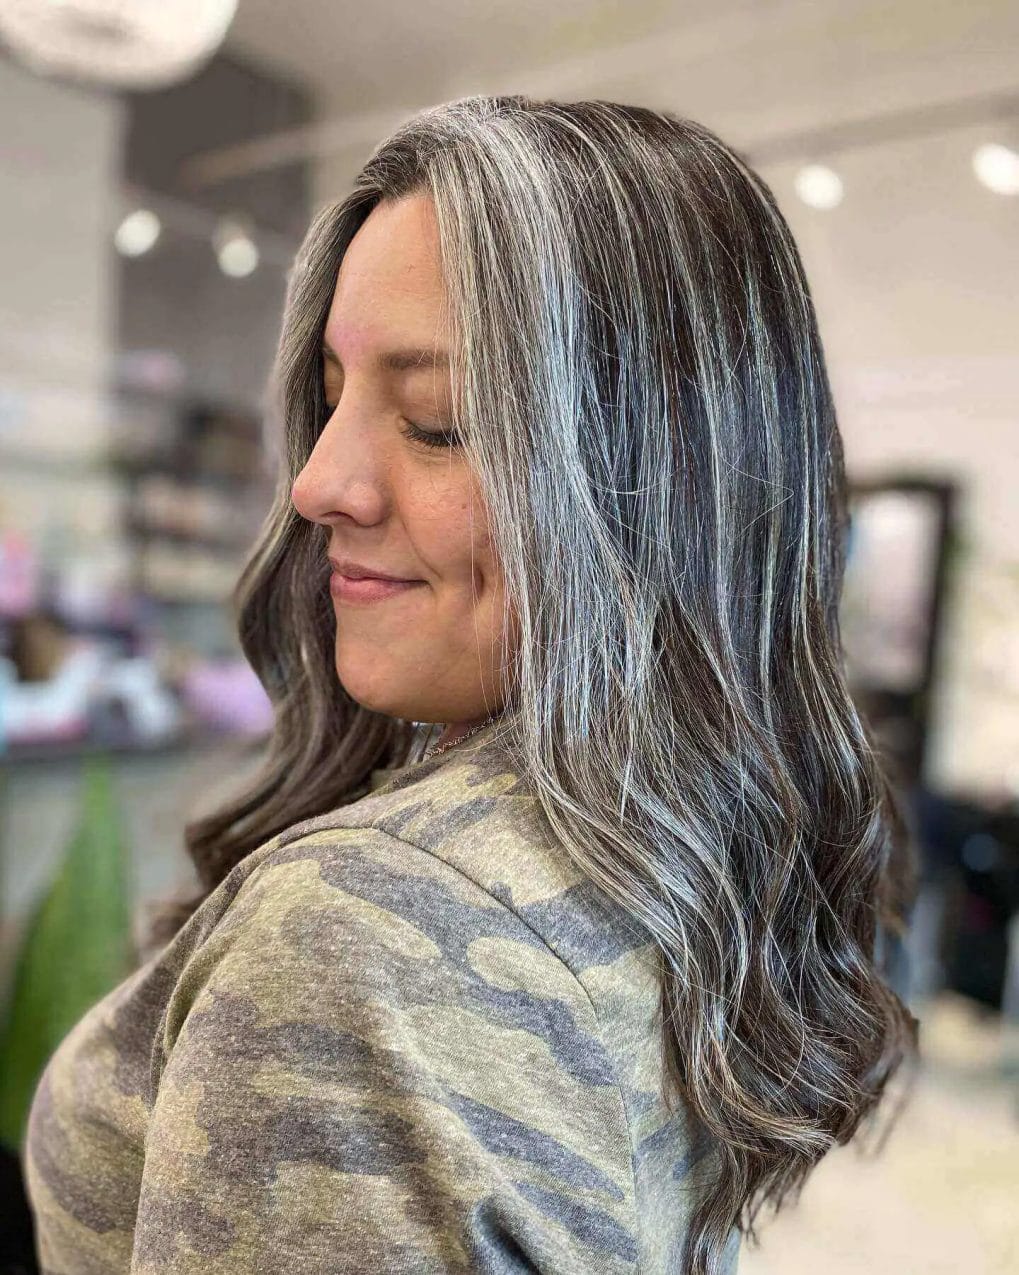 Sophisticated long layers blending natural gray and charcoal tones.